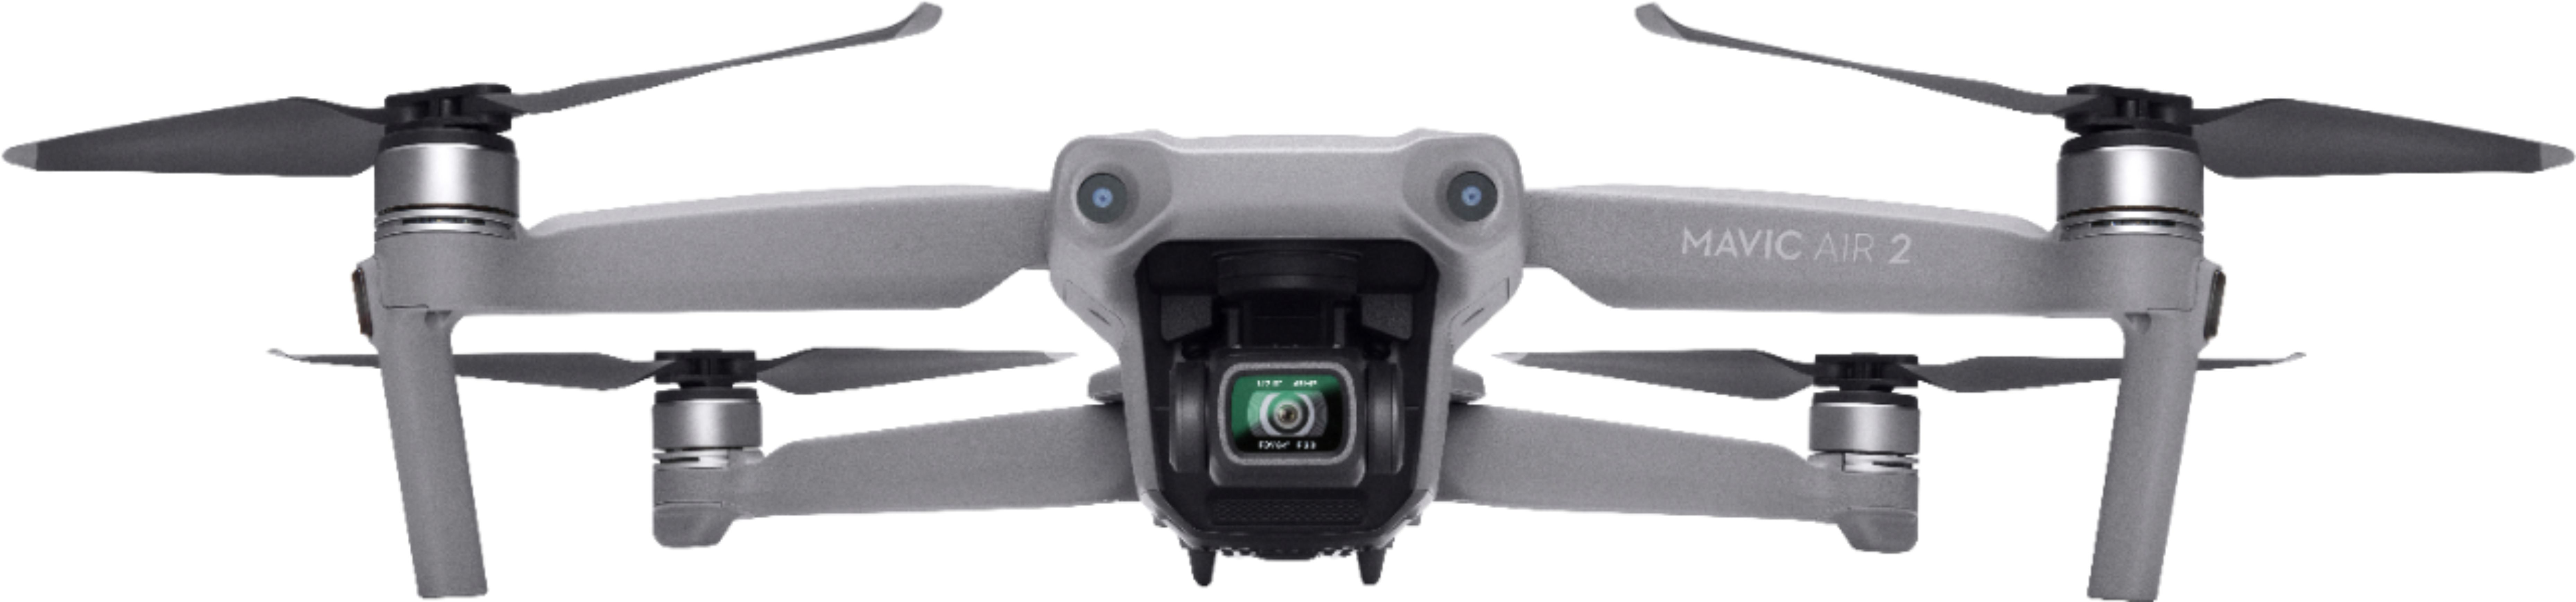 Best Buy: DJI Mavic Air 2 Drone Fly More Combo with Remote